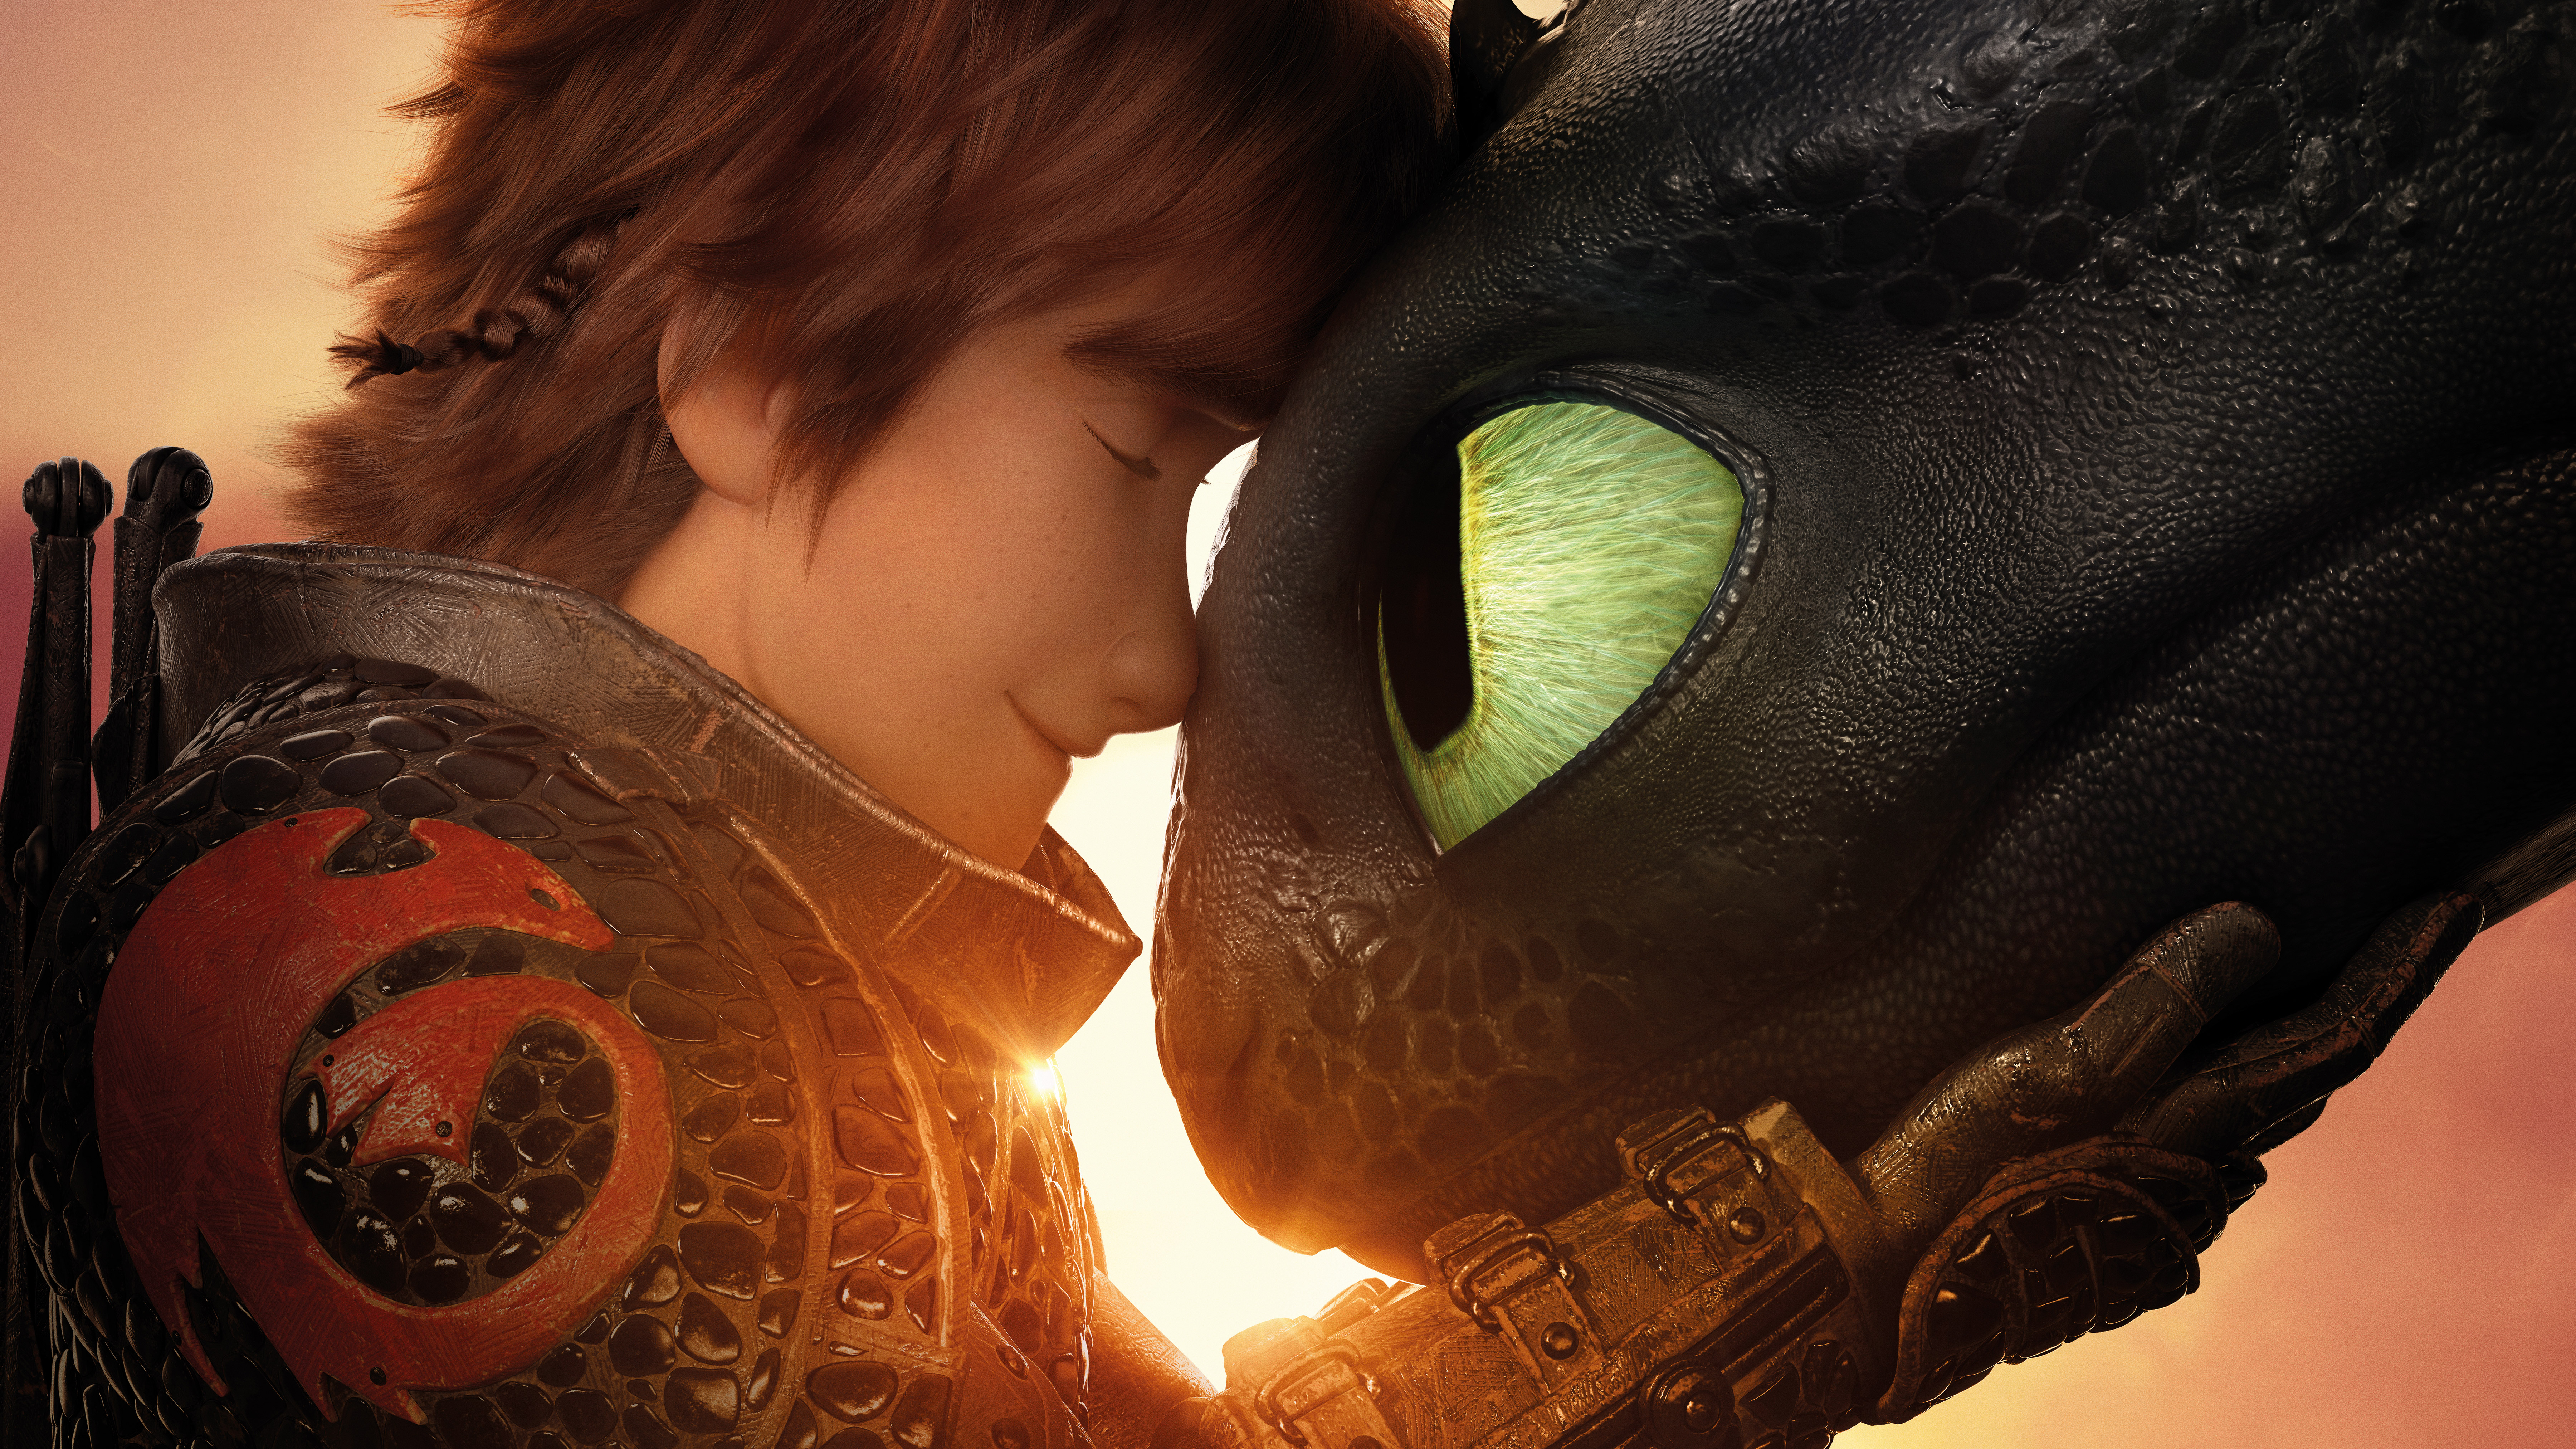 Wallpapers 2019 Movies how to train your dragon How To Train Your Dragon The Hidden World on the desktop